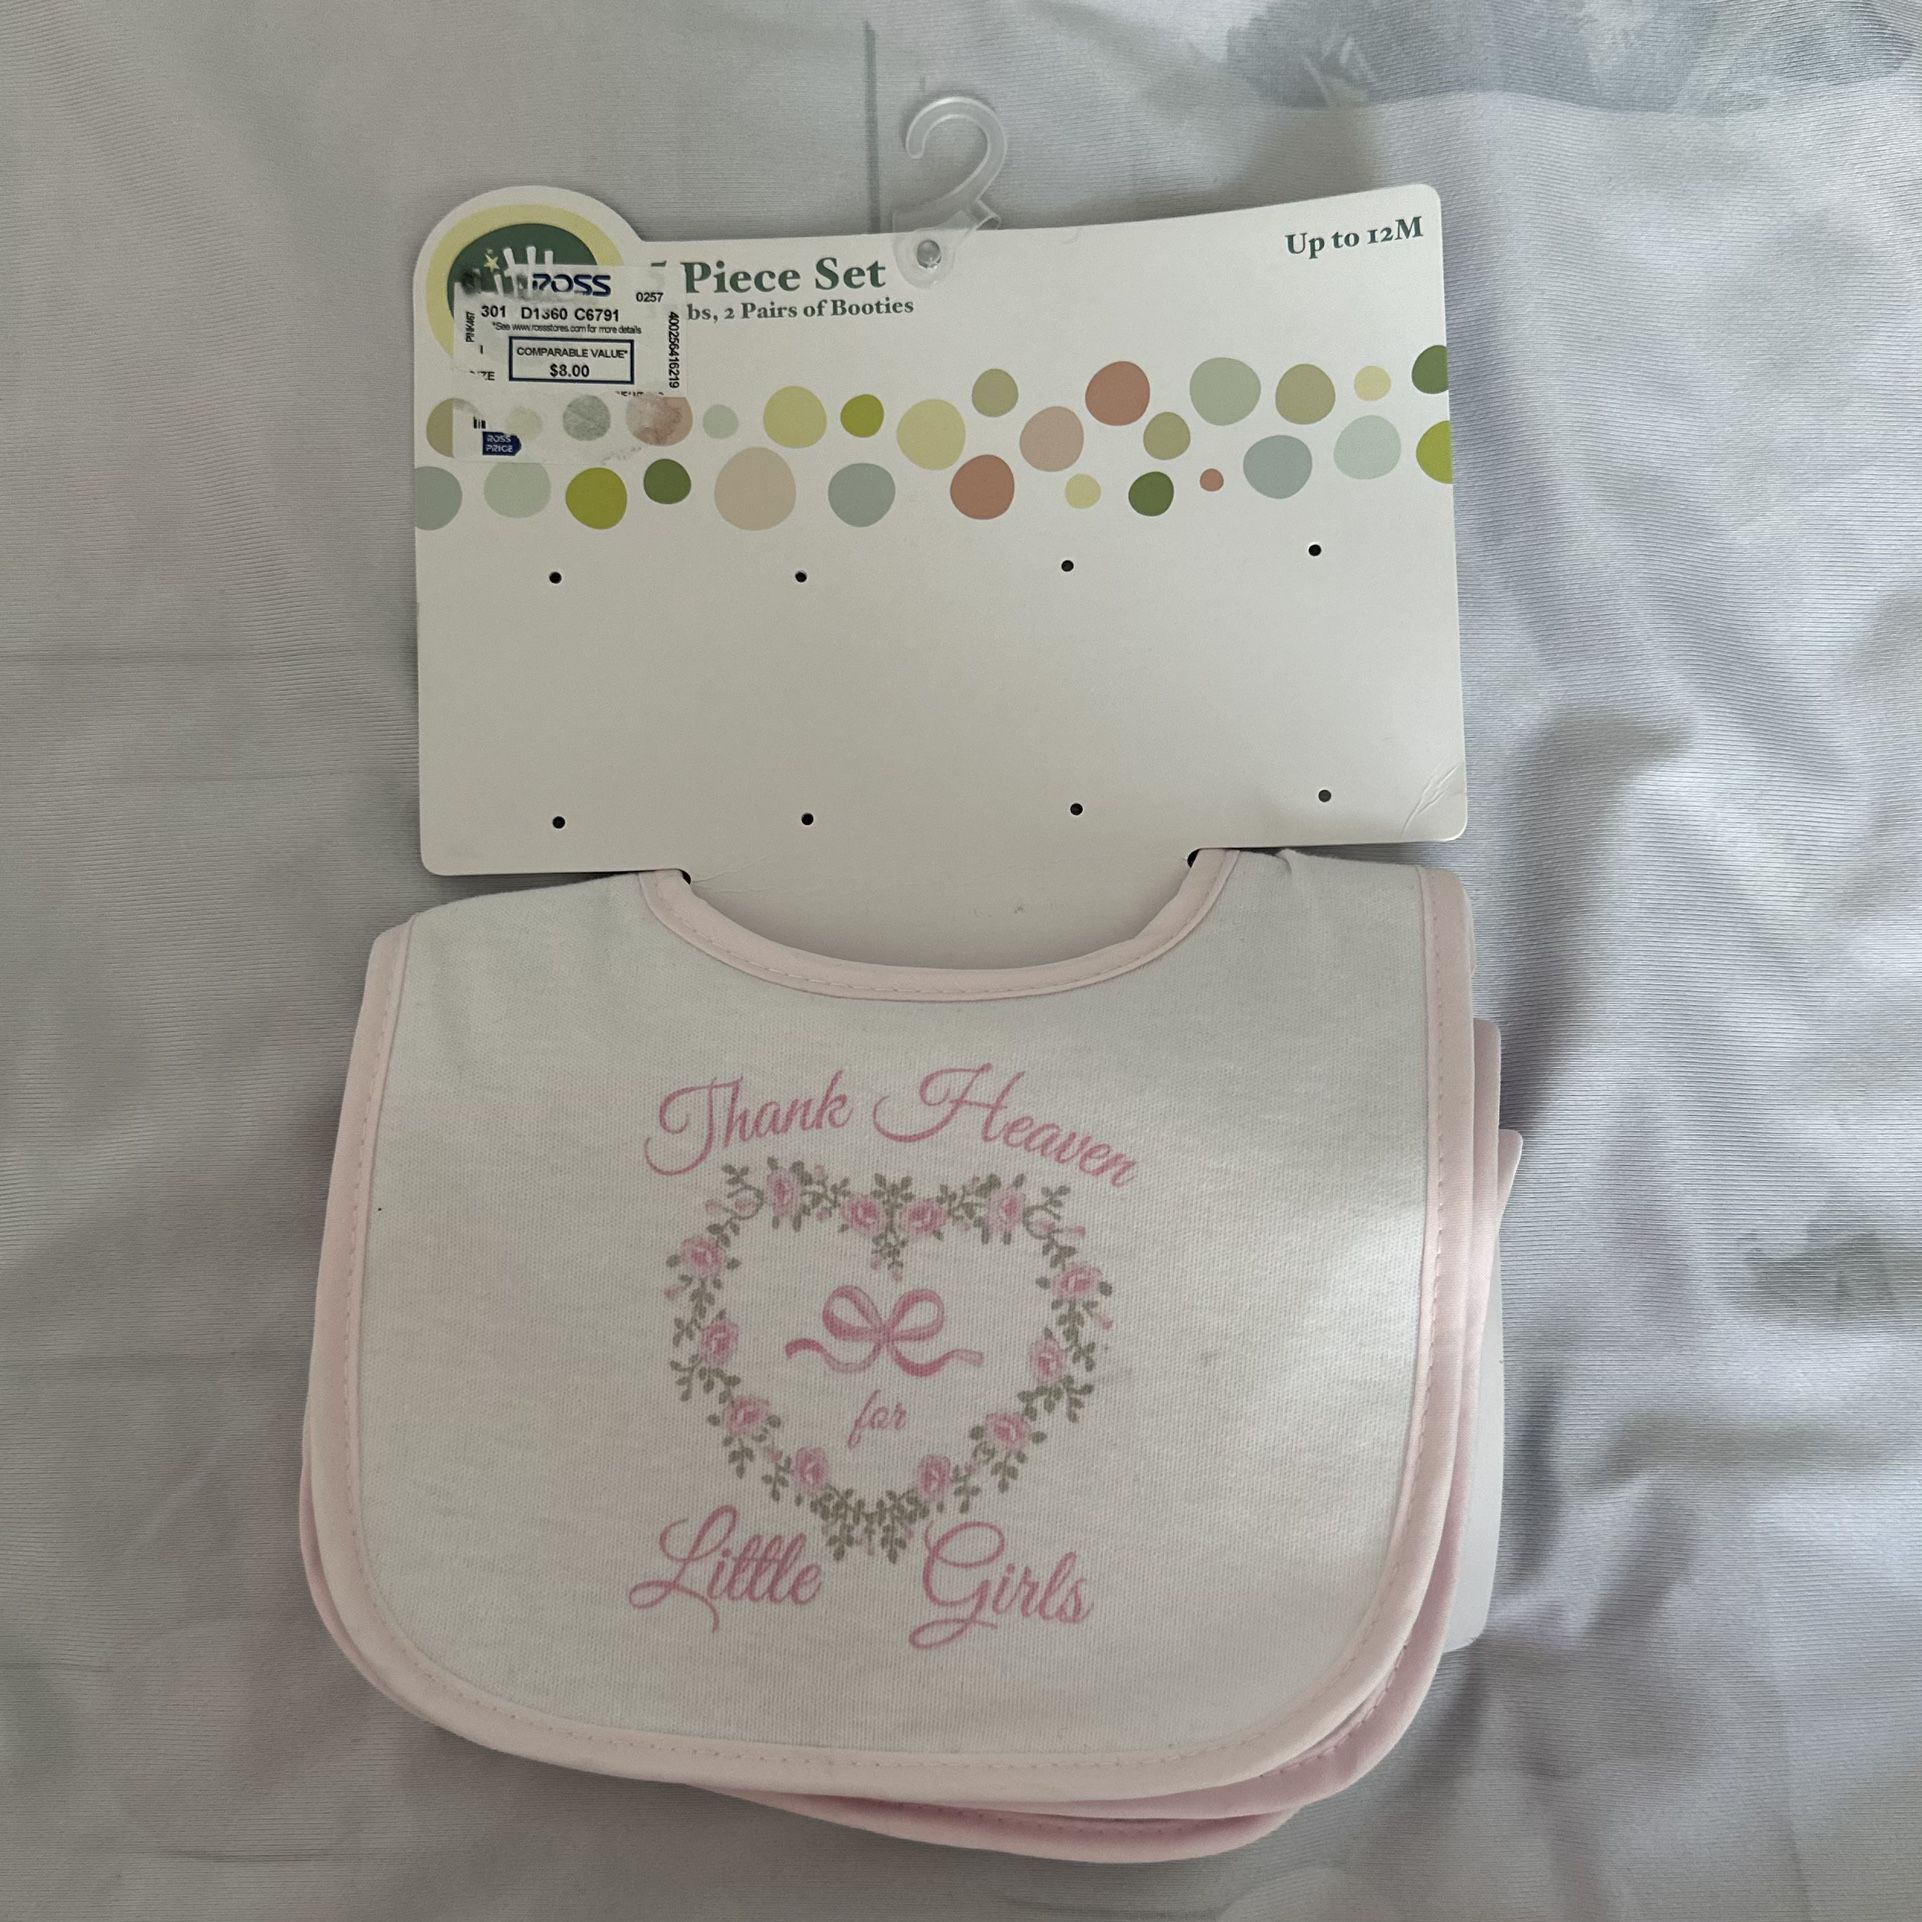 3 BIBS BRAND NEW WITH TAGS NWT